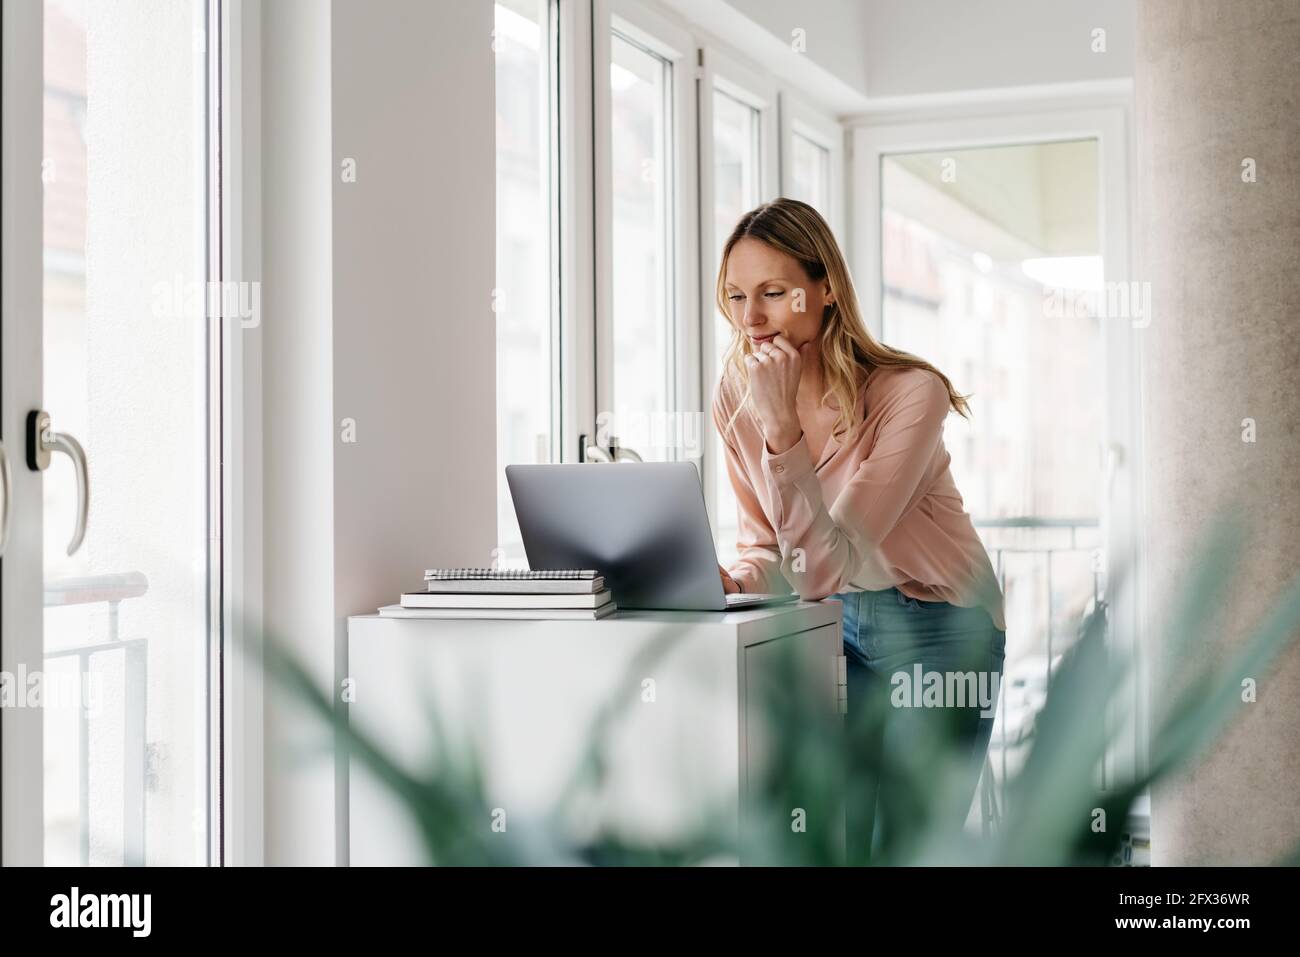 Young woman standing working at a laptop with a thoughtful smile as she leans on the cabinet in a high key apartment or office viewed past a potted pl Stock Photo